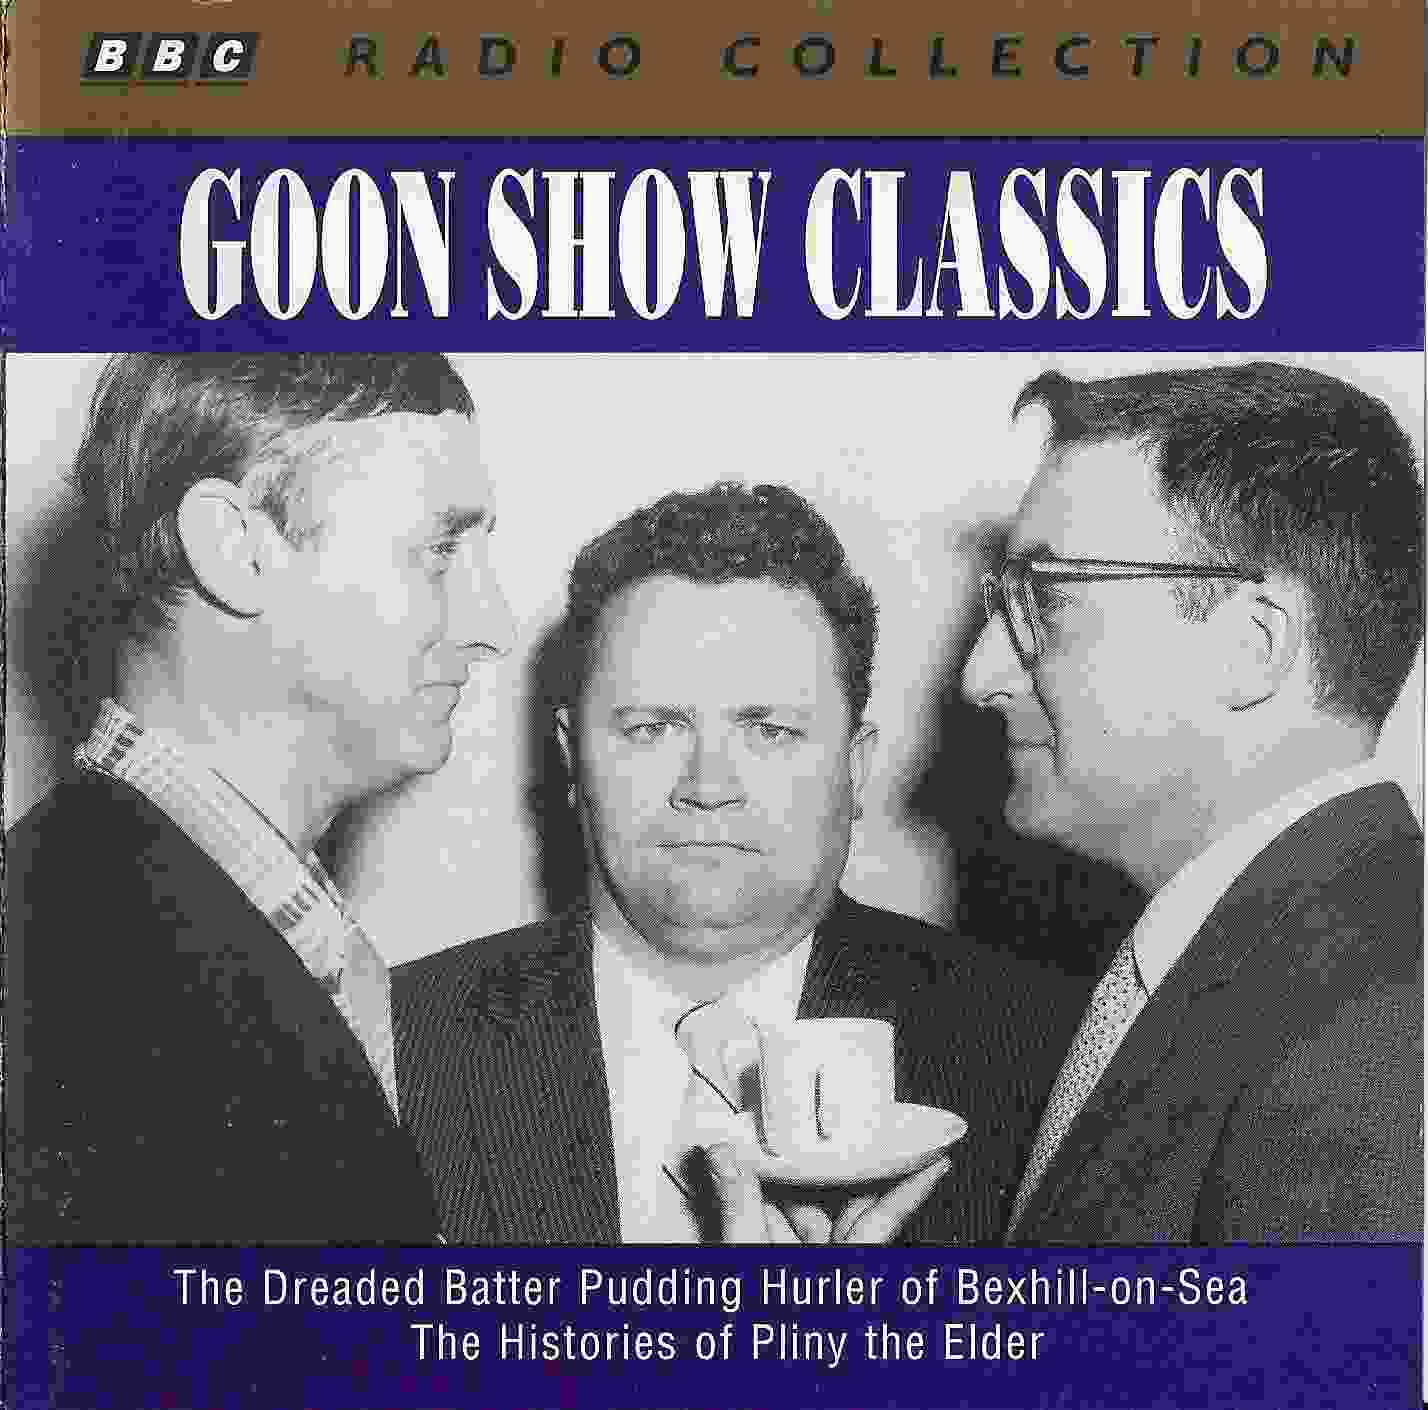 Picture of Goon show classics by artist Spike Milligan / Larry Stephens from the BBC cds - Records and Tapes library